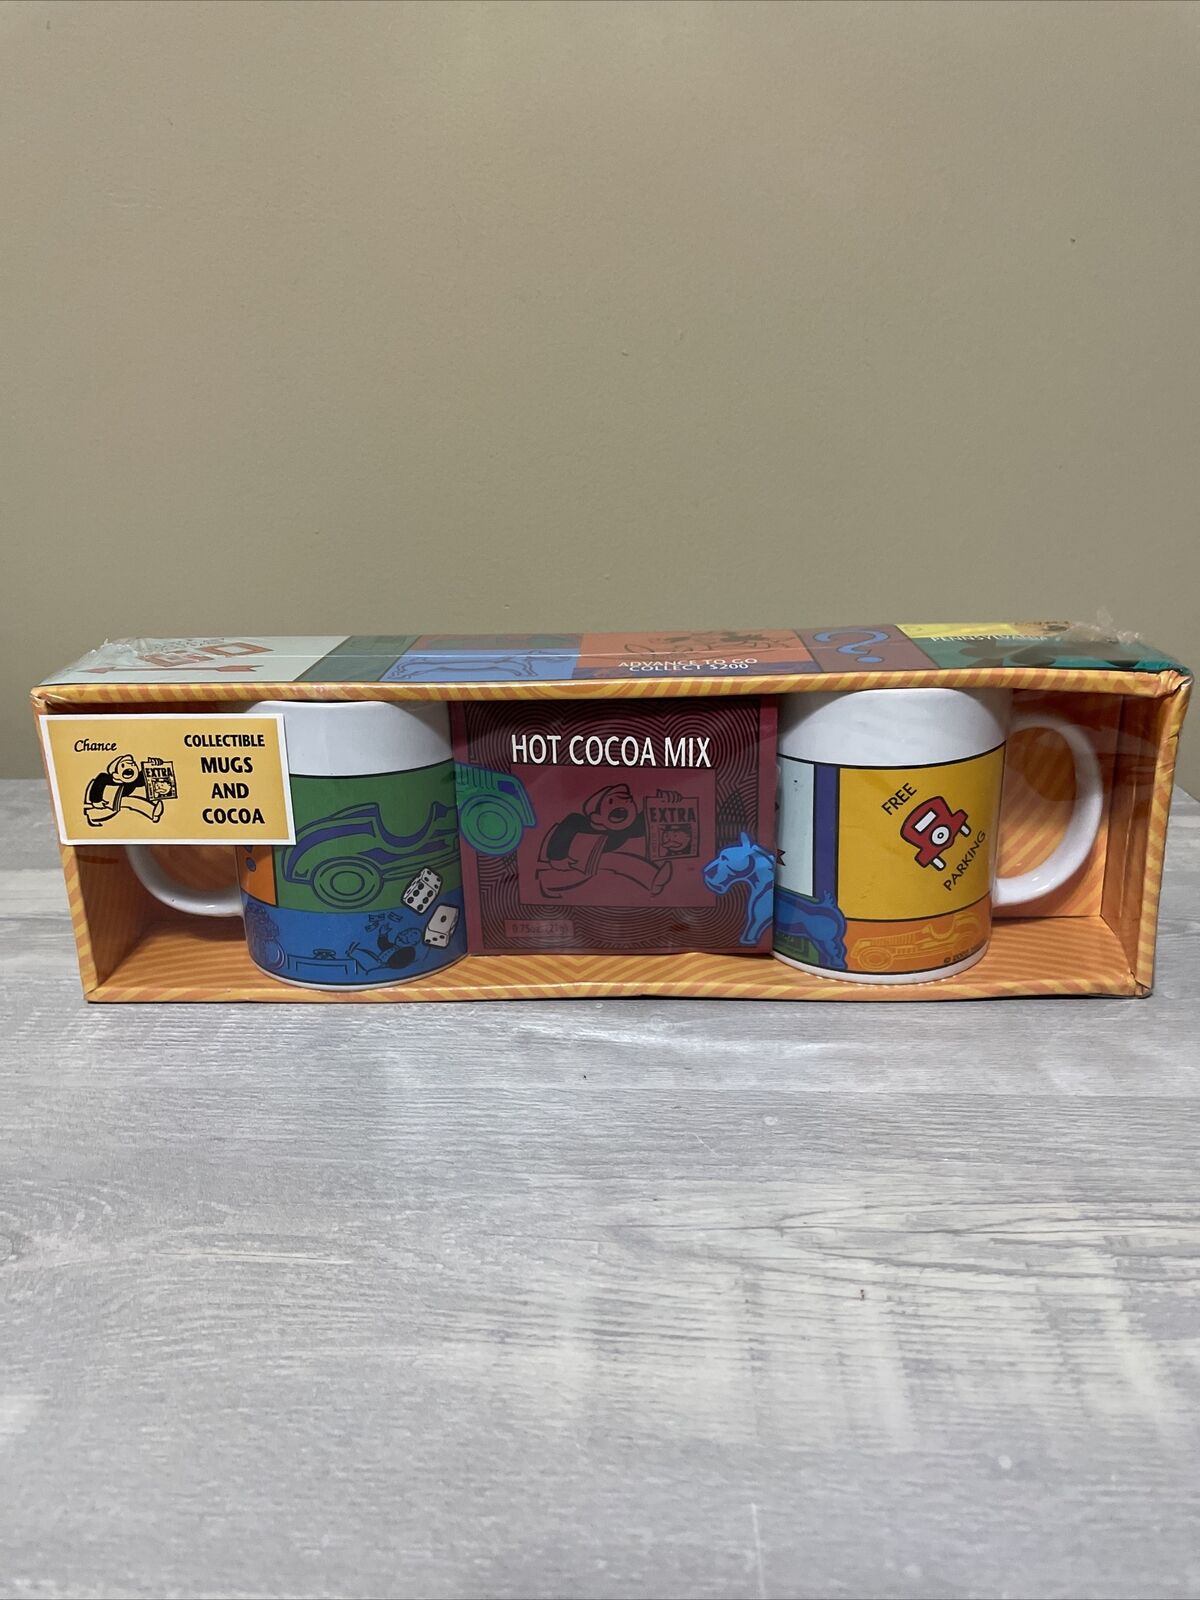 NOS 2005 Monopoly Mugs 70th anniversary Sealed In Box Set Collectible Coffee Mug